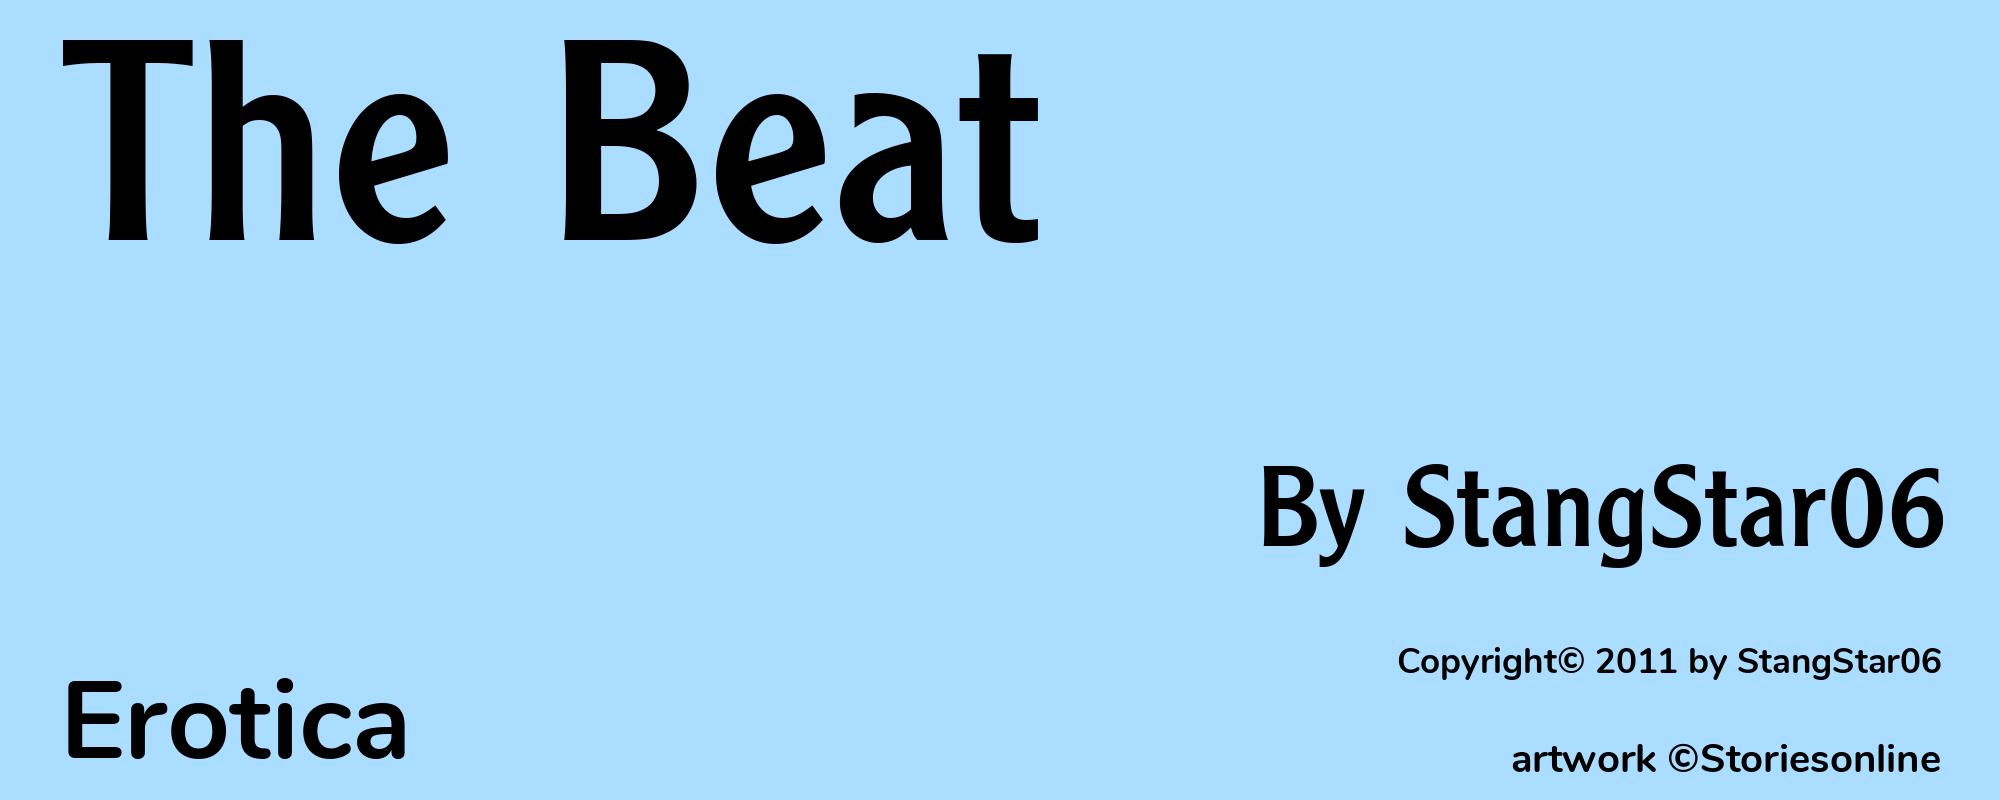 The Beat - Cover